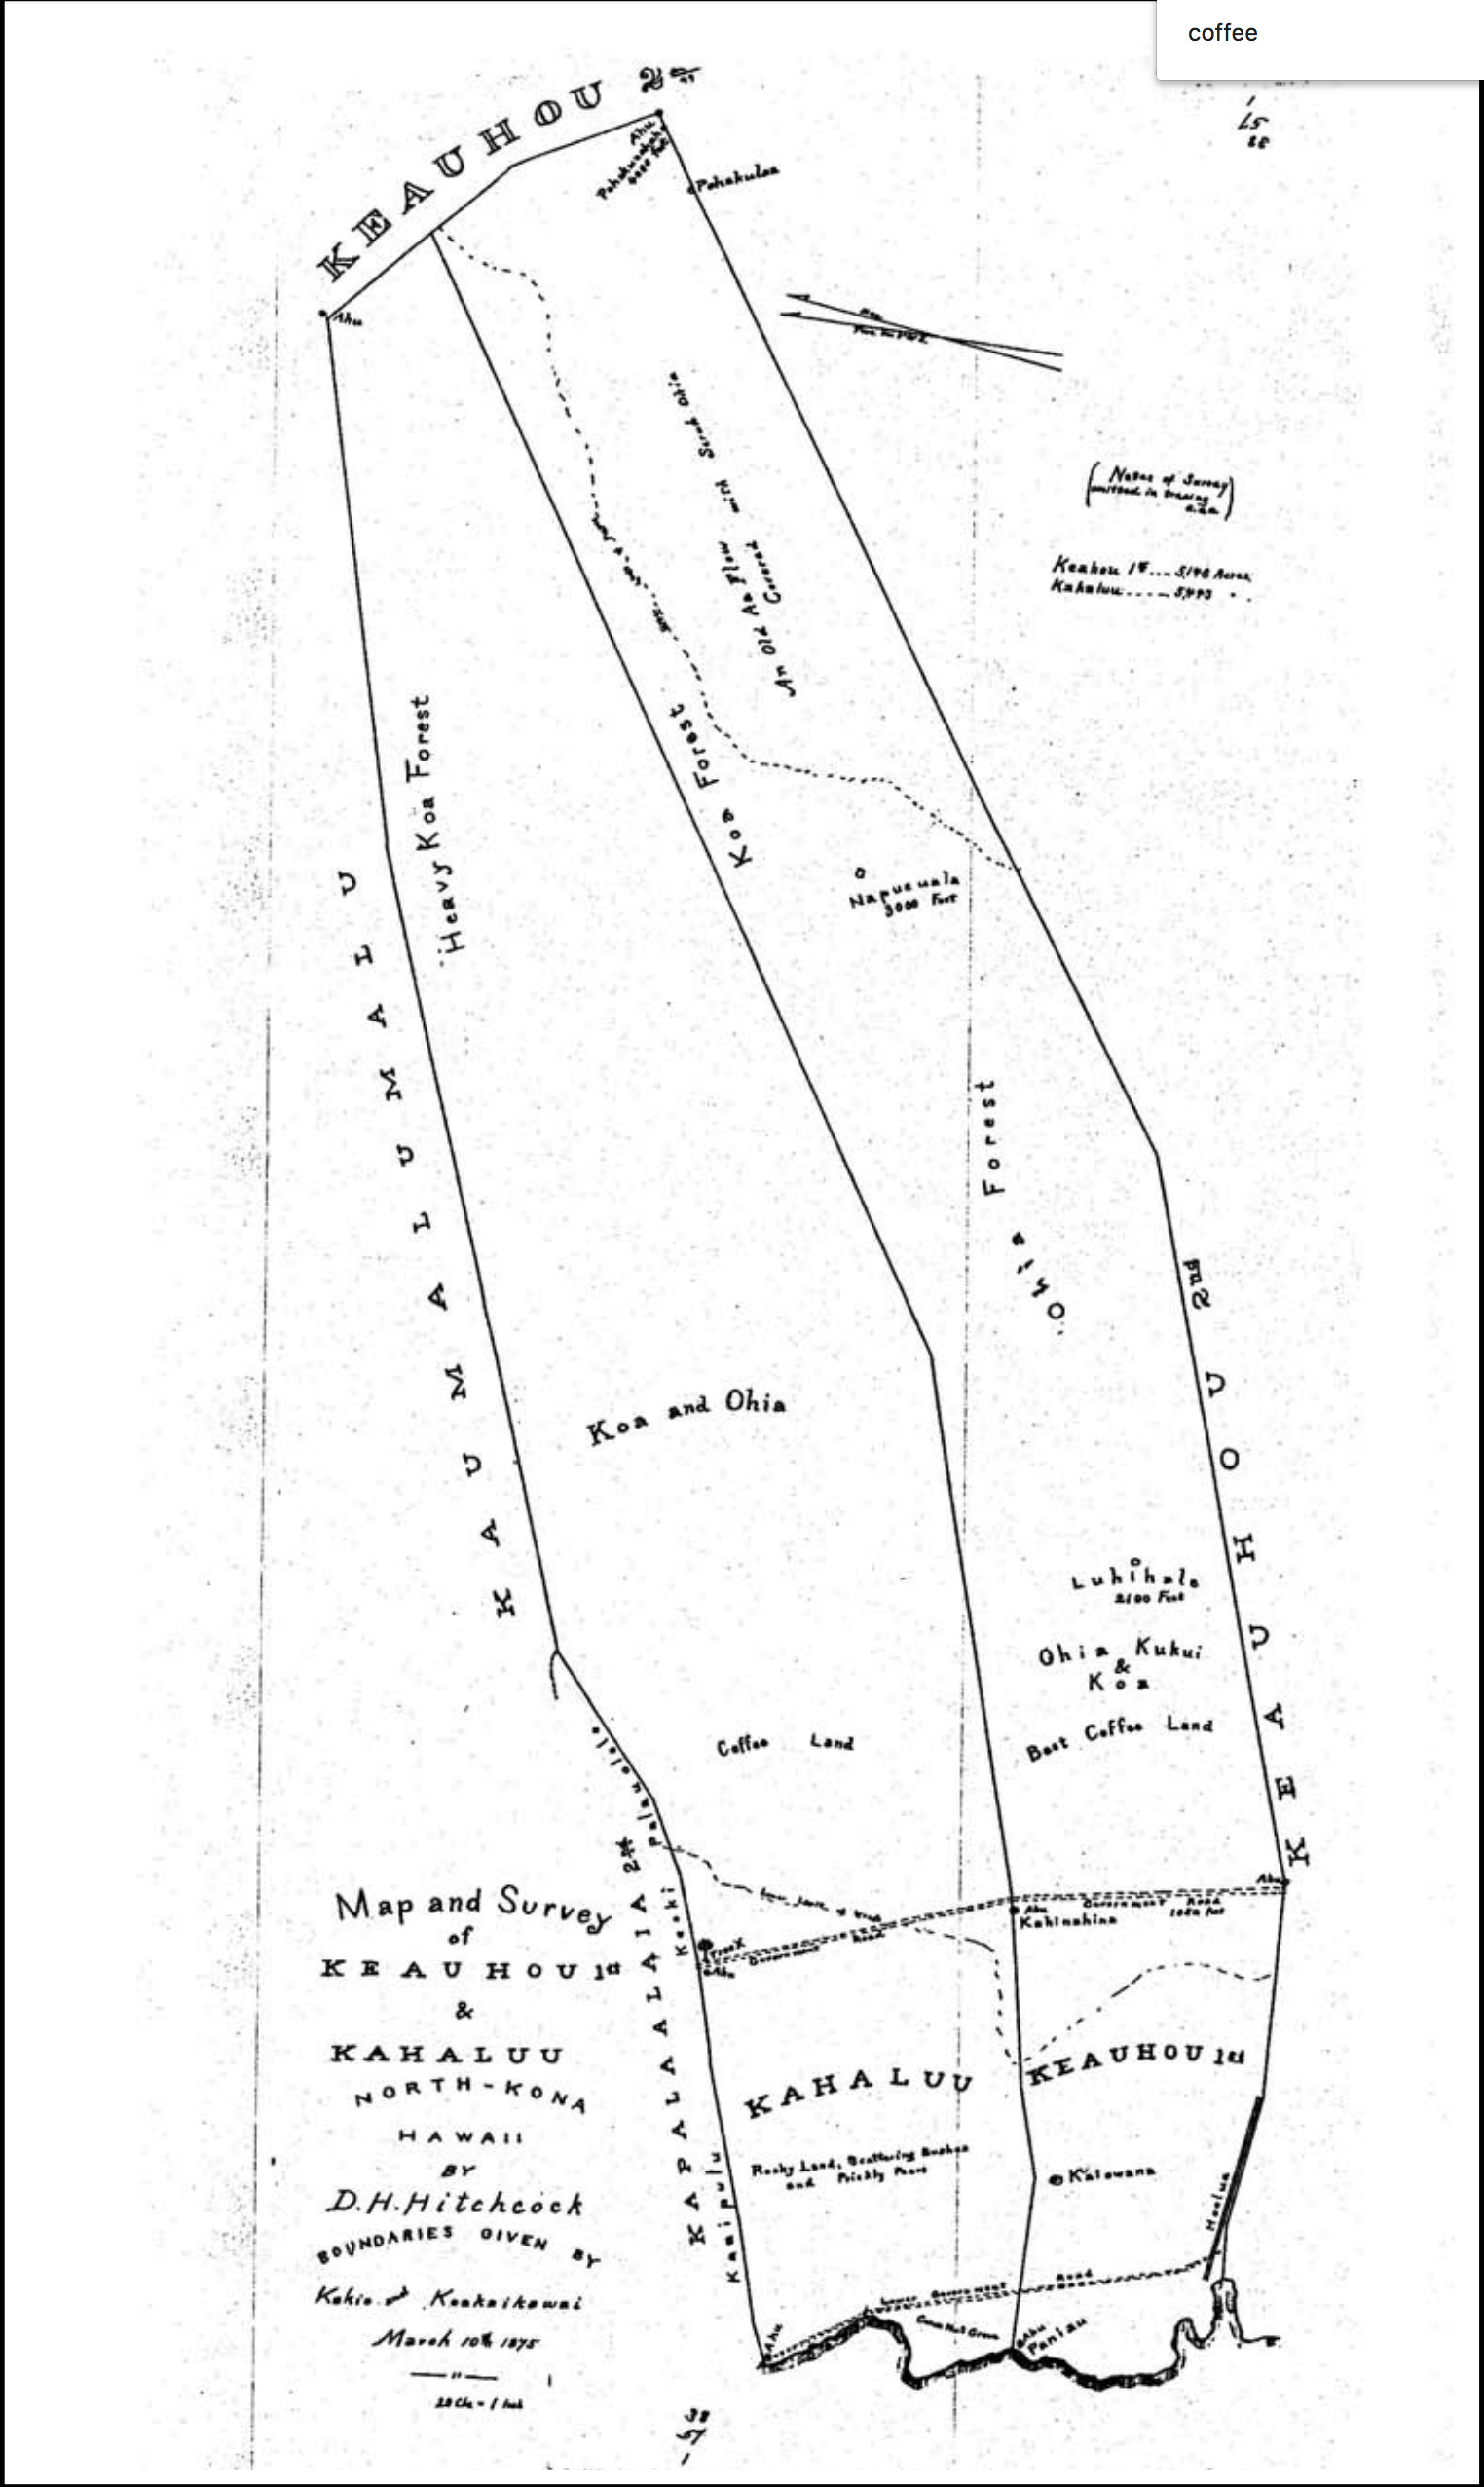 Map and Survey of Keauhou 1st &amp; Kahaluu. North Kona, Hawaii. D.H. Hitchcock (1875) Boundaries according to Witness Testimonies before the Boundary Commission Bishop Estate Map No 38